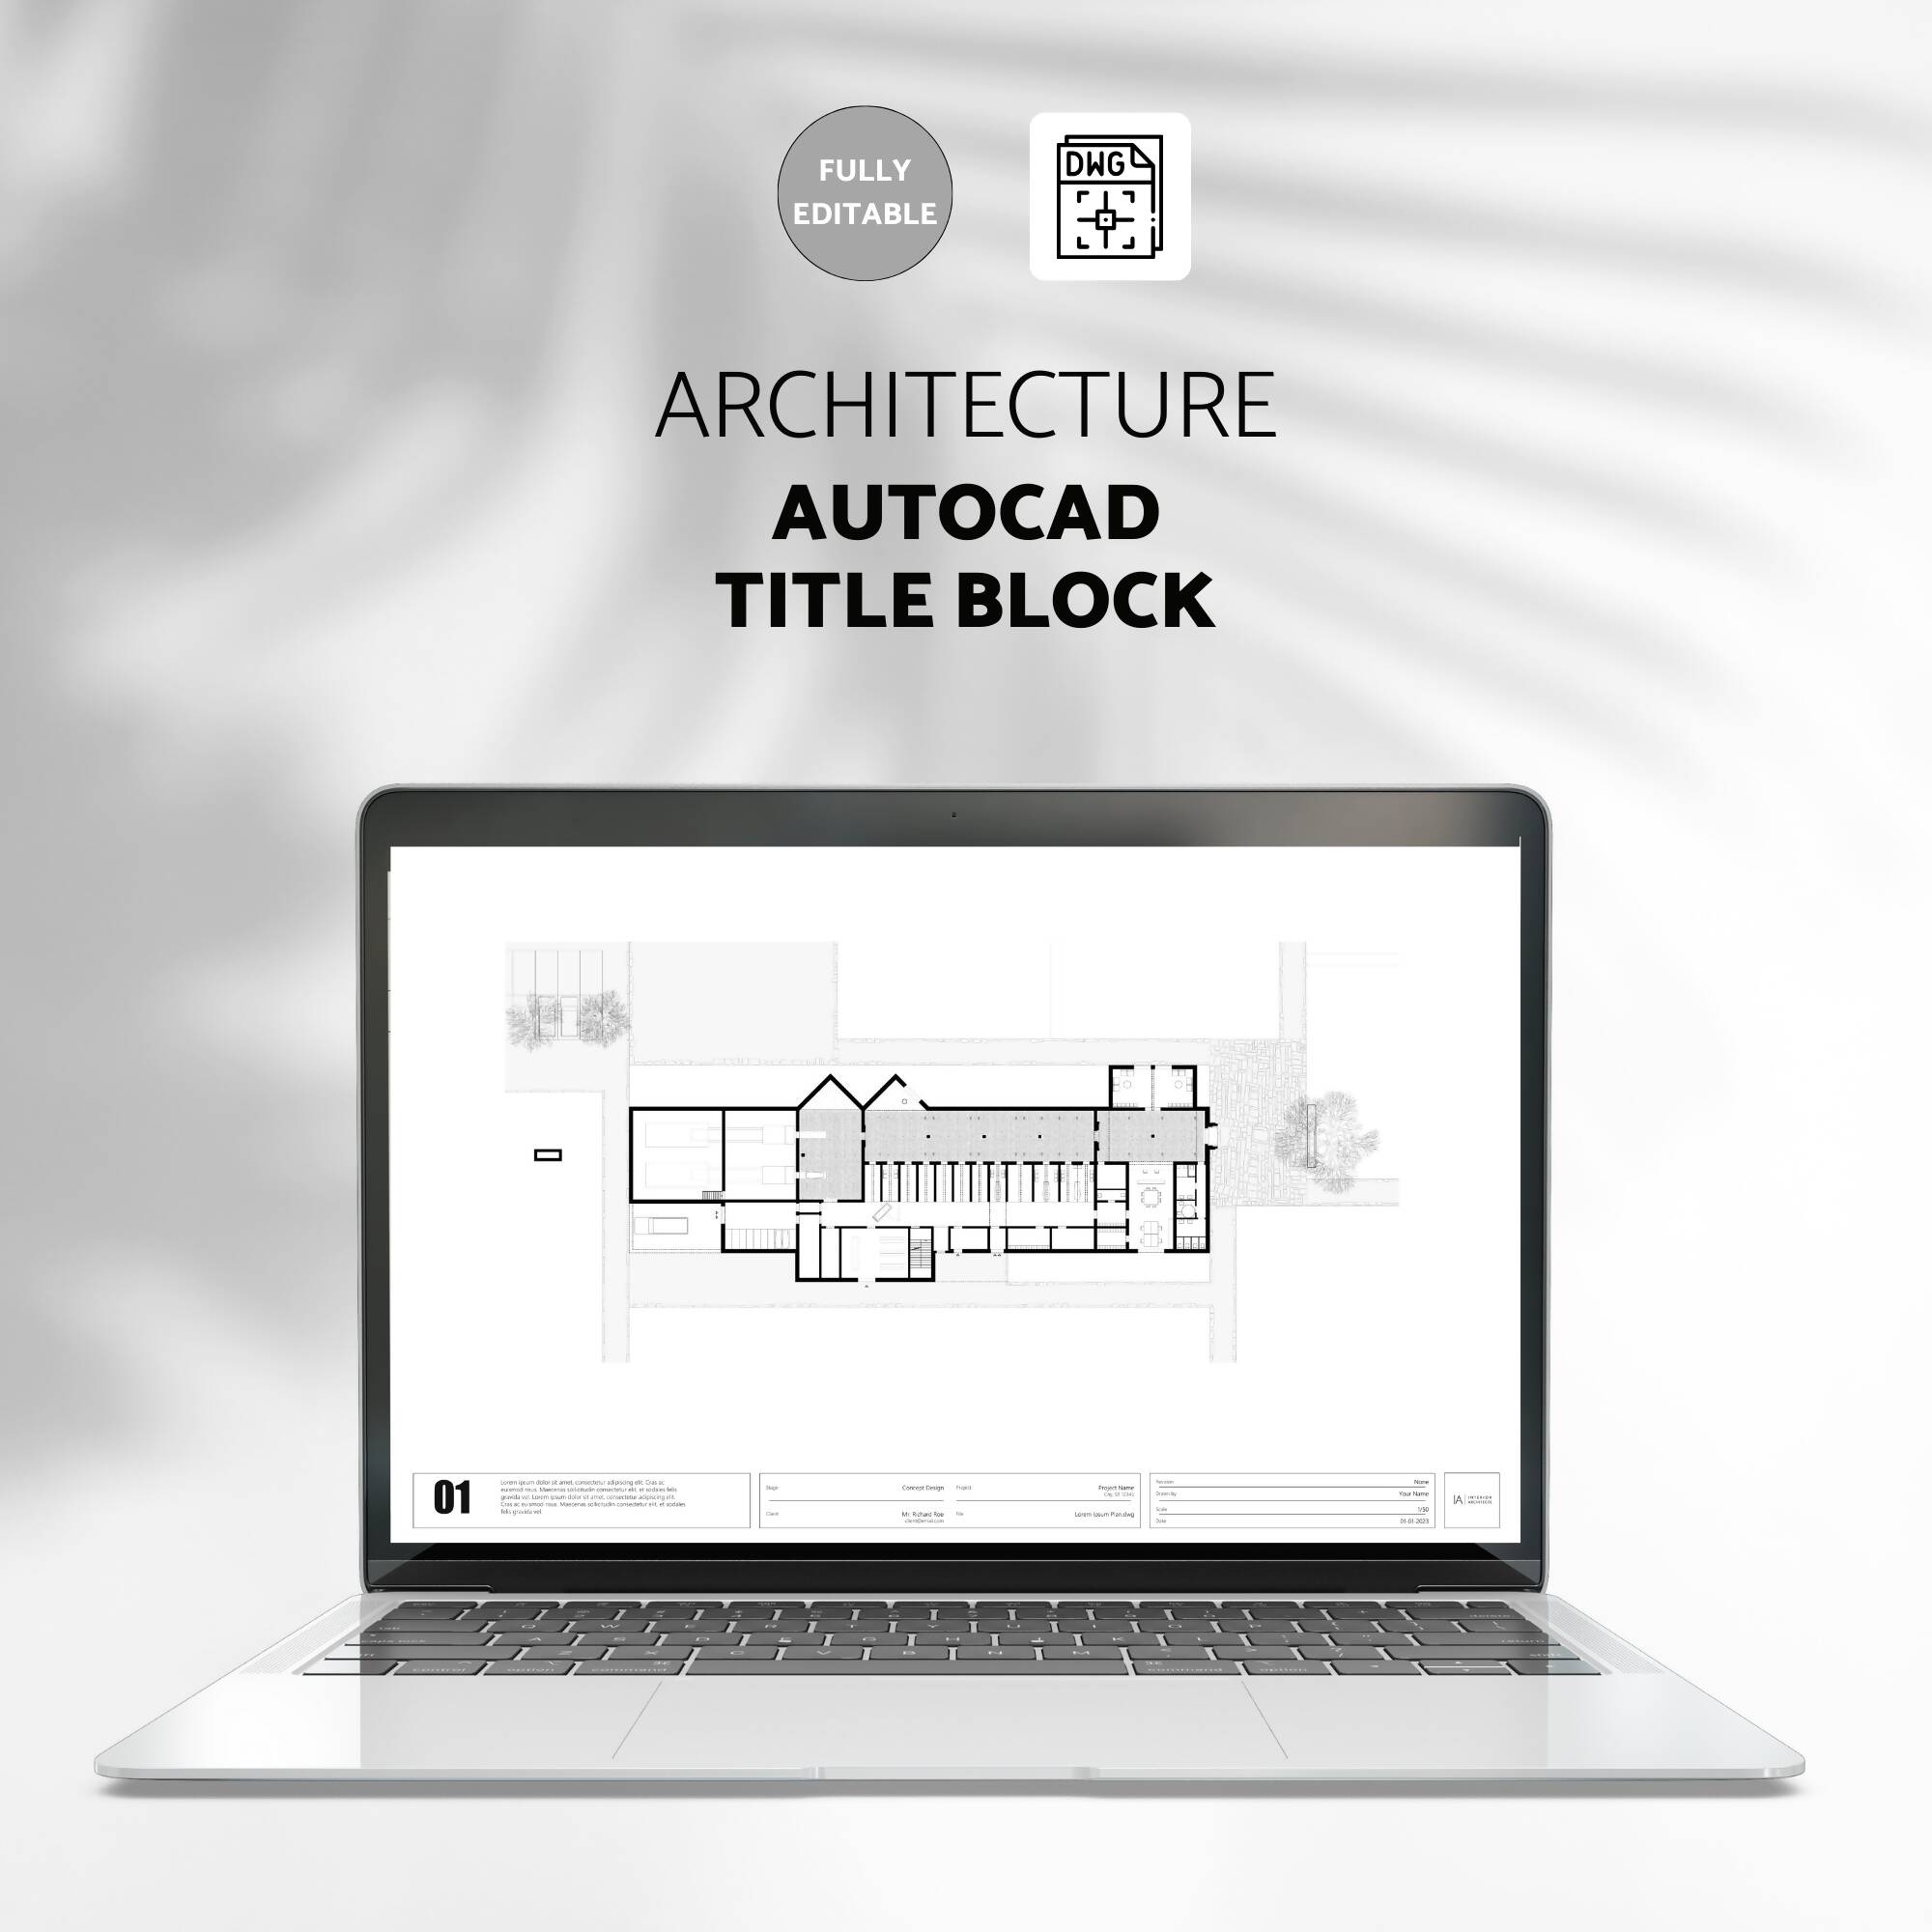 Autocad Title Block Template III PNG - Toffu Co